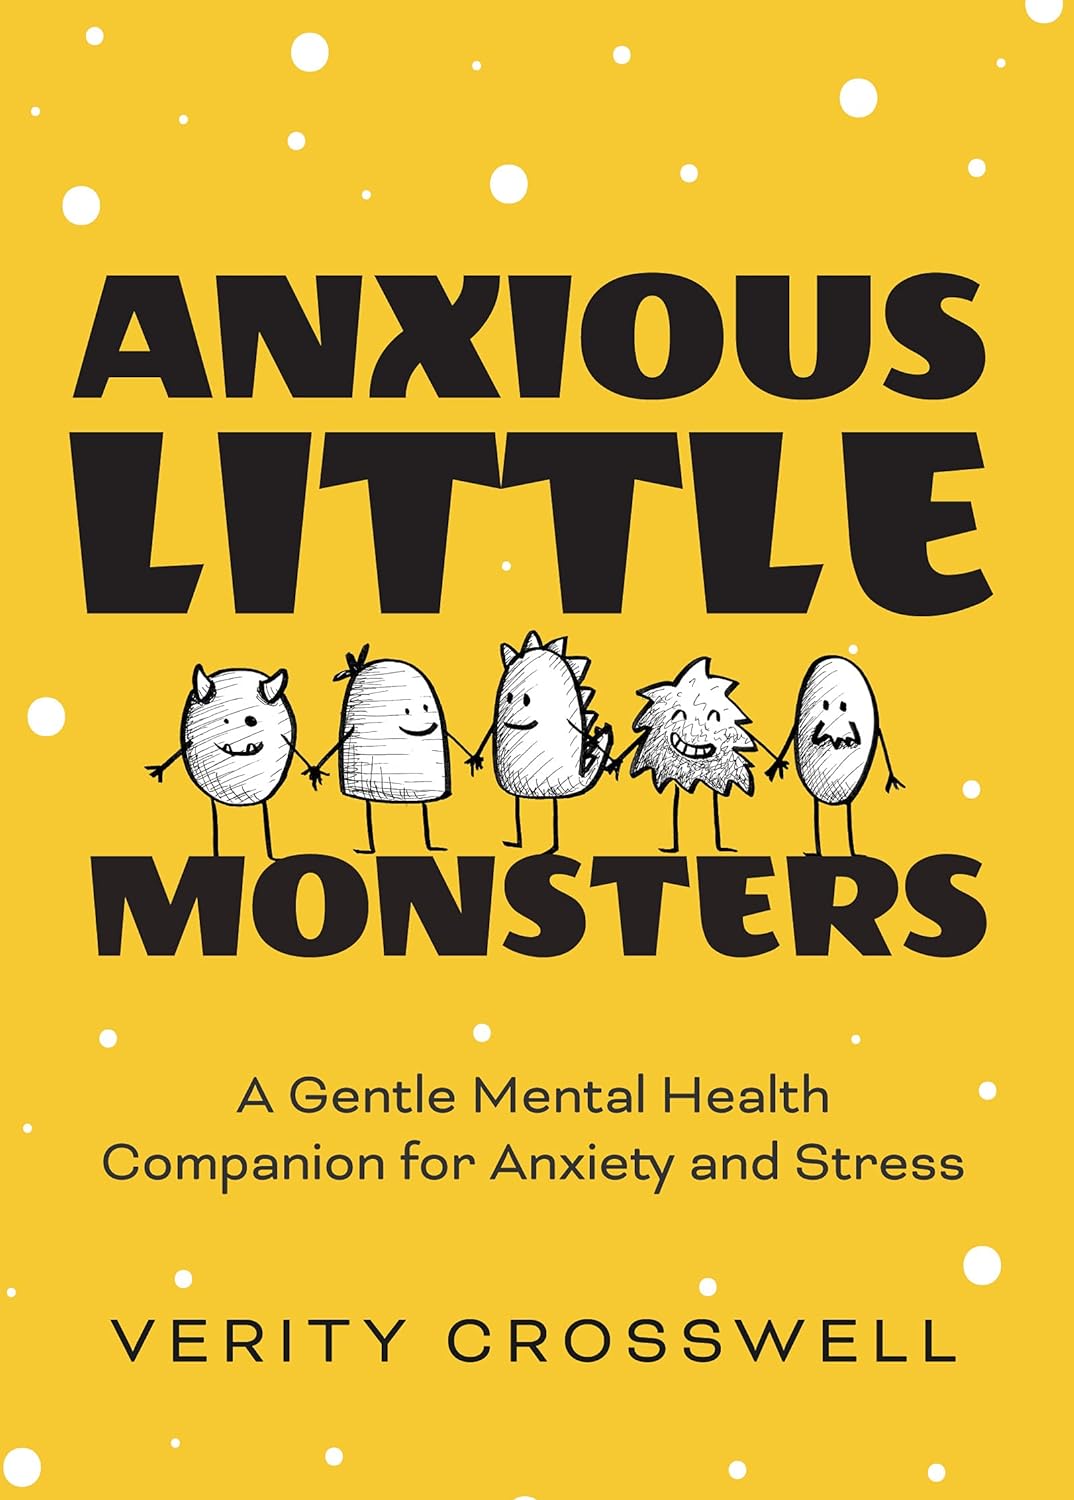 Cover of "Anxious Little Monsters" by Verity Crosswell